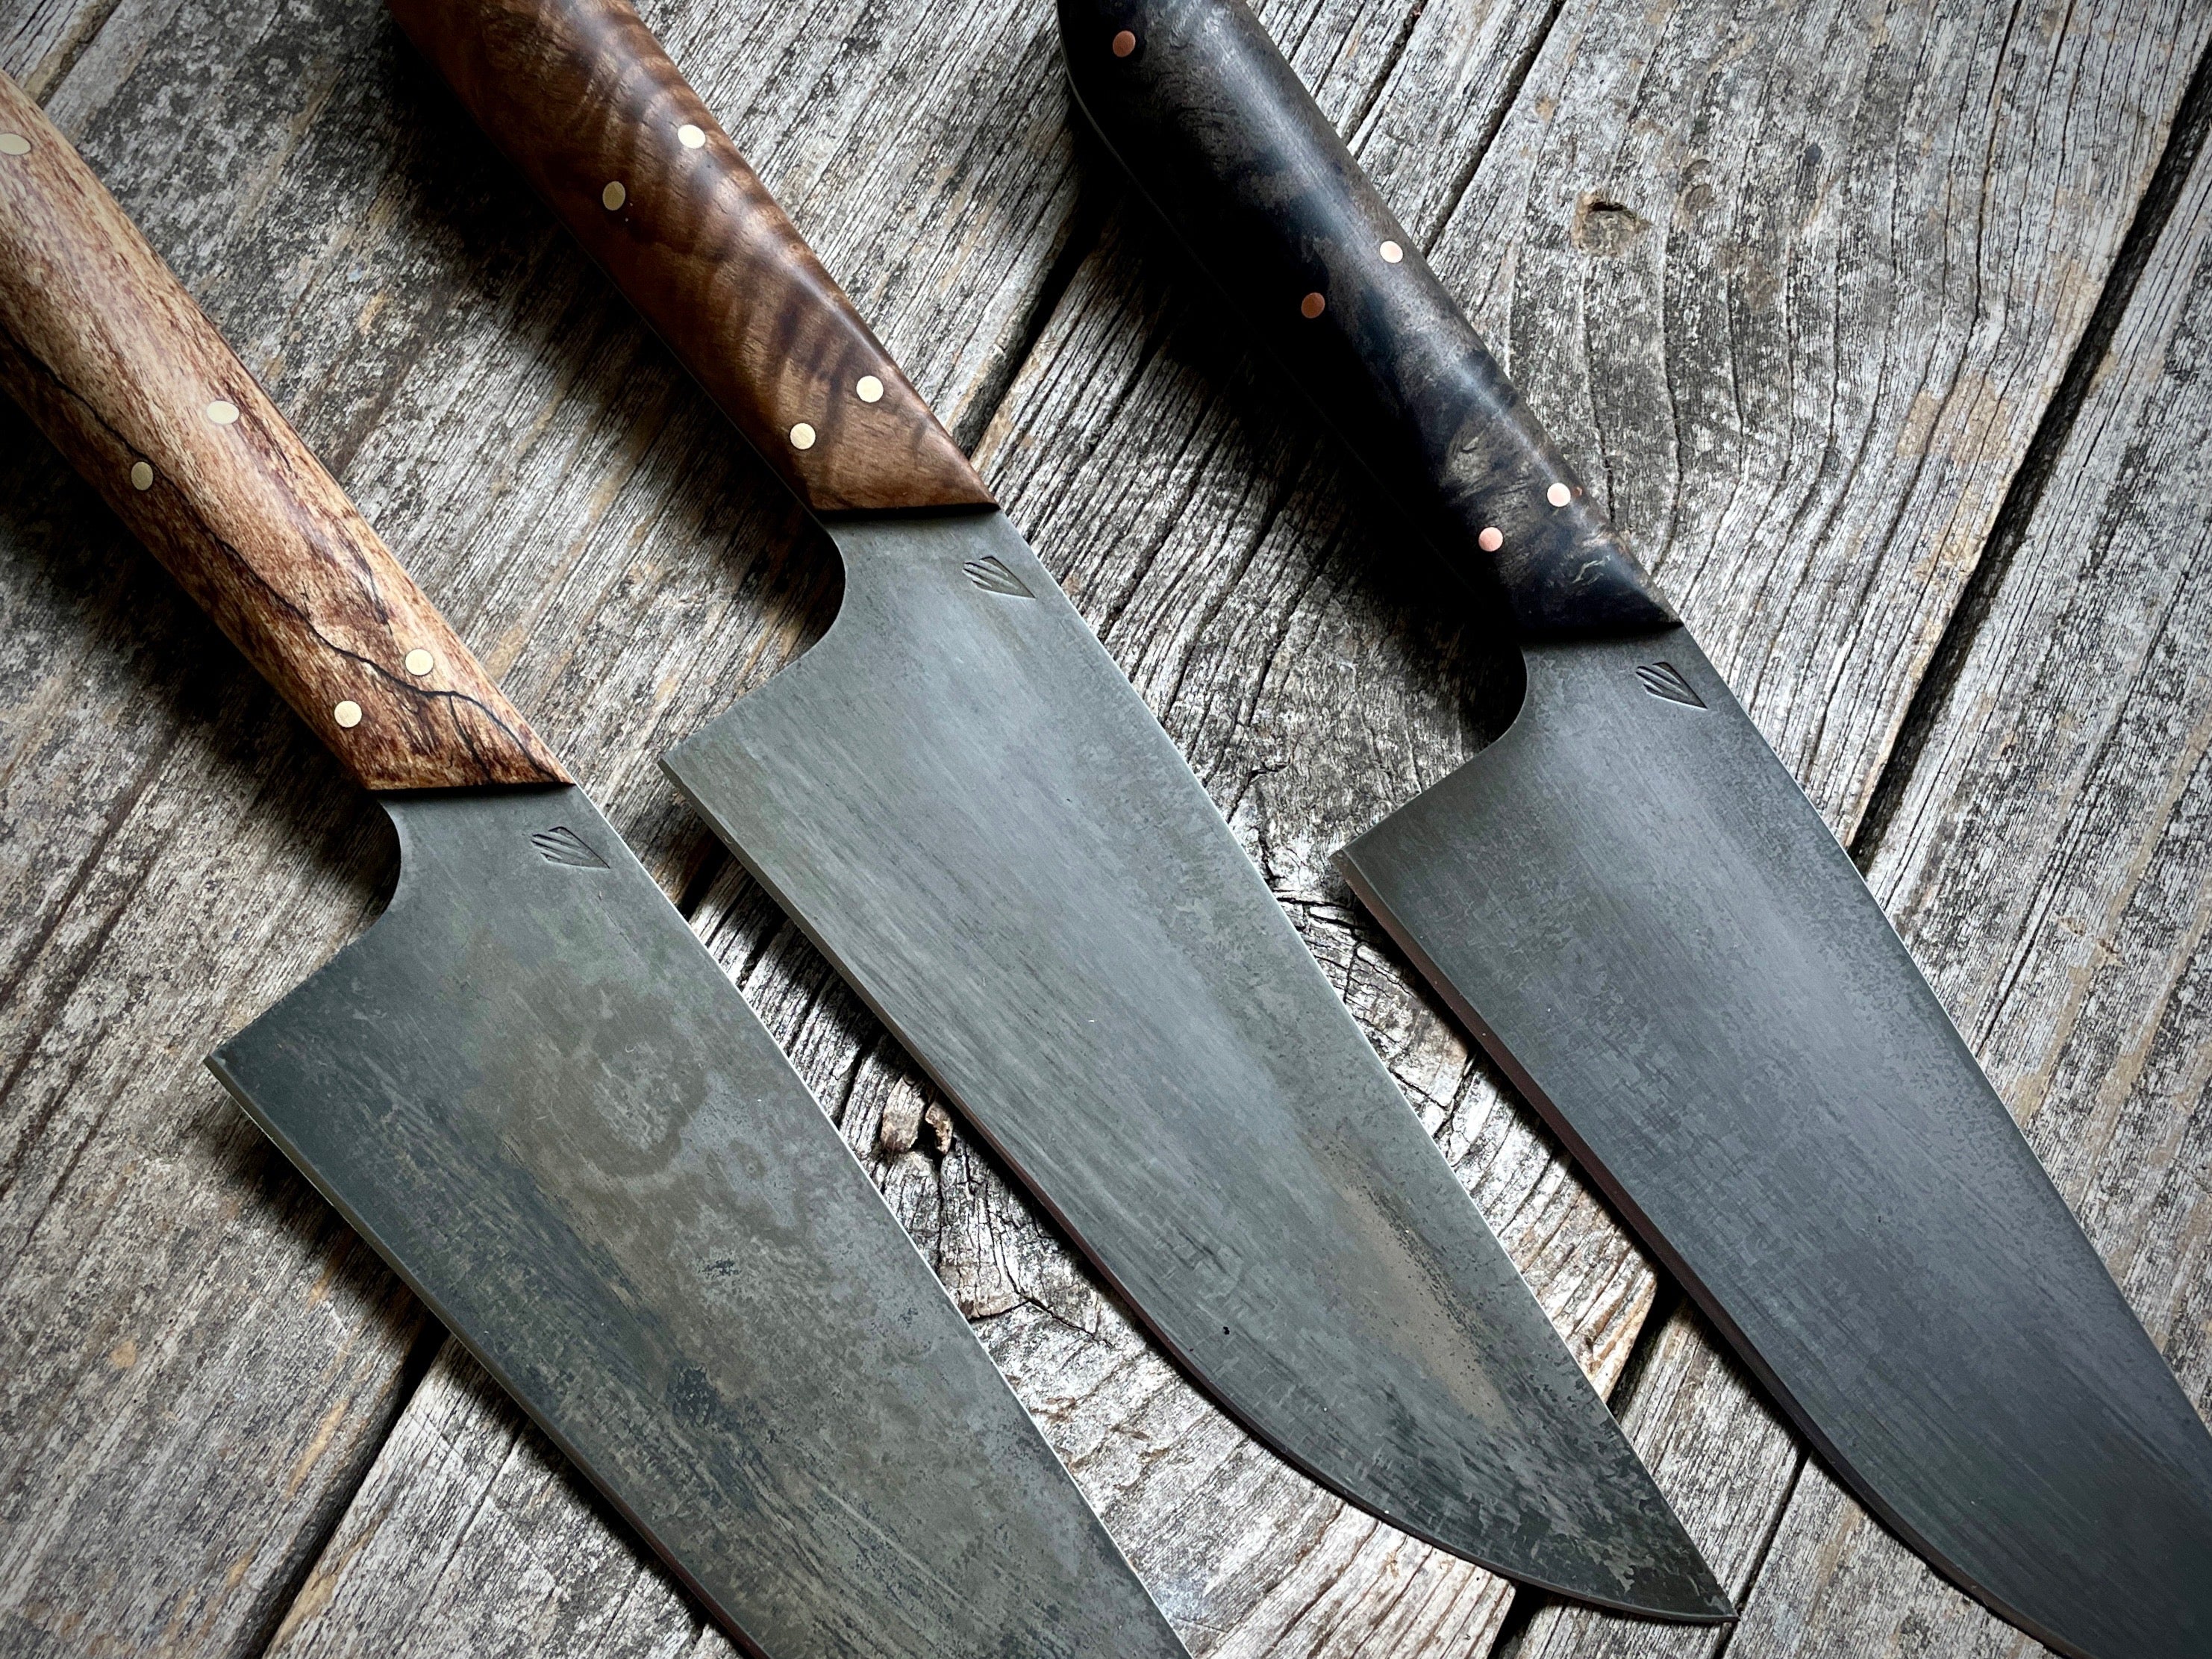 What is the difference between a carbon steel knife and stainless